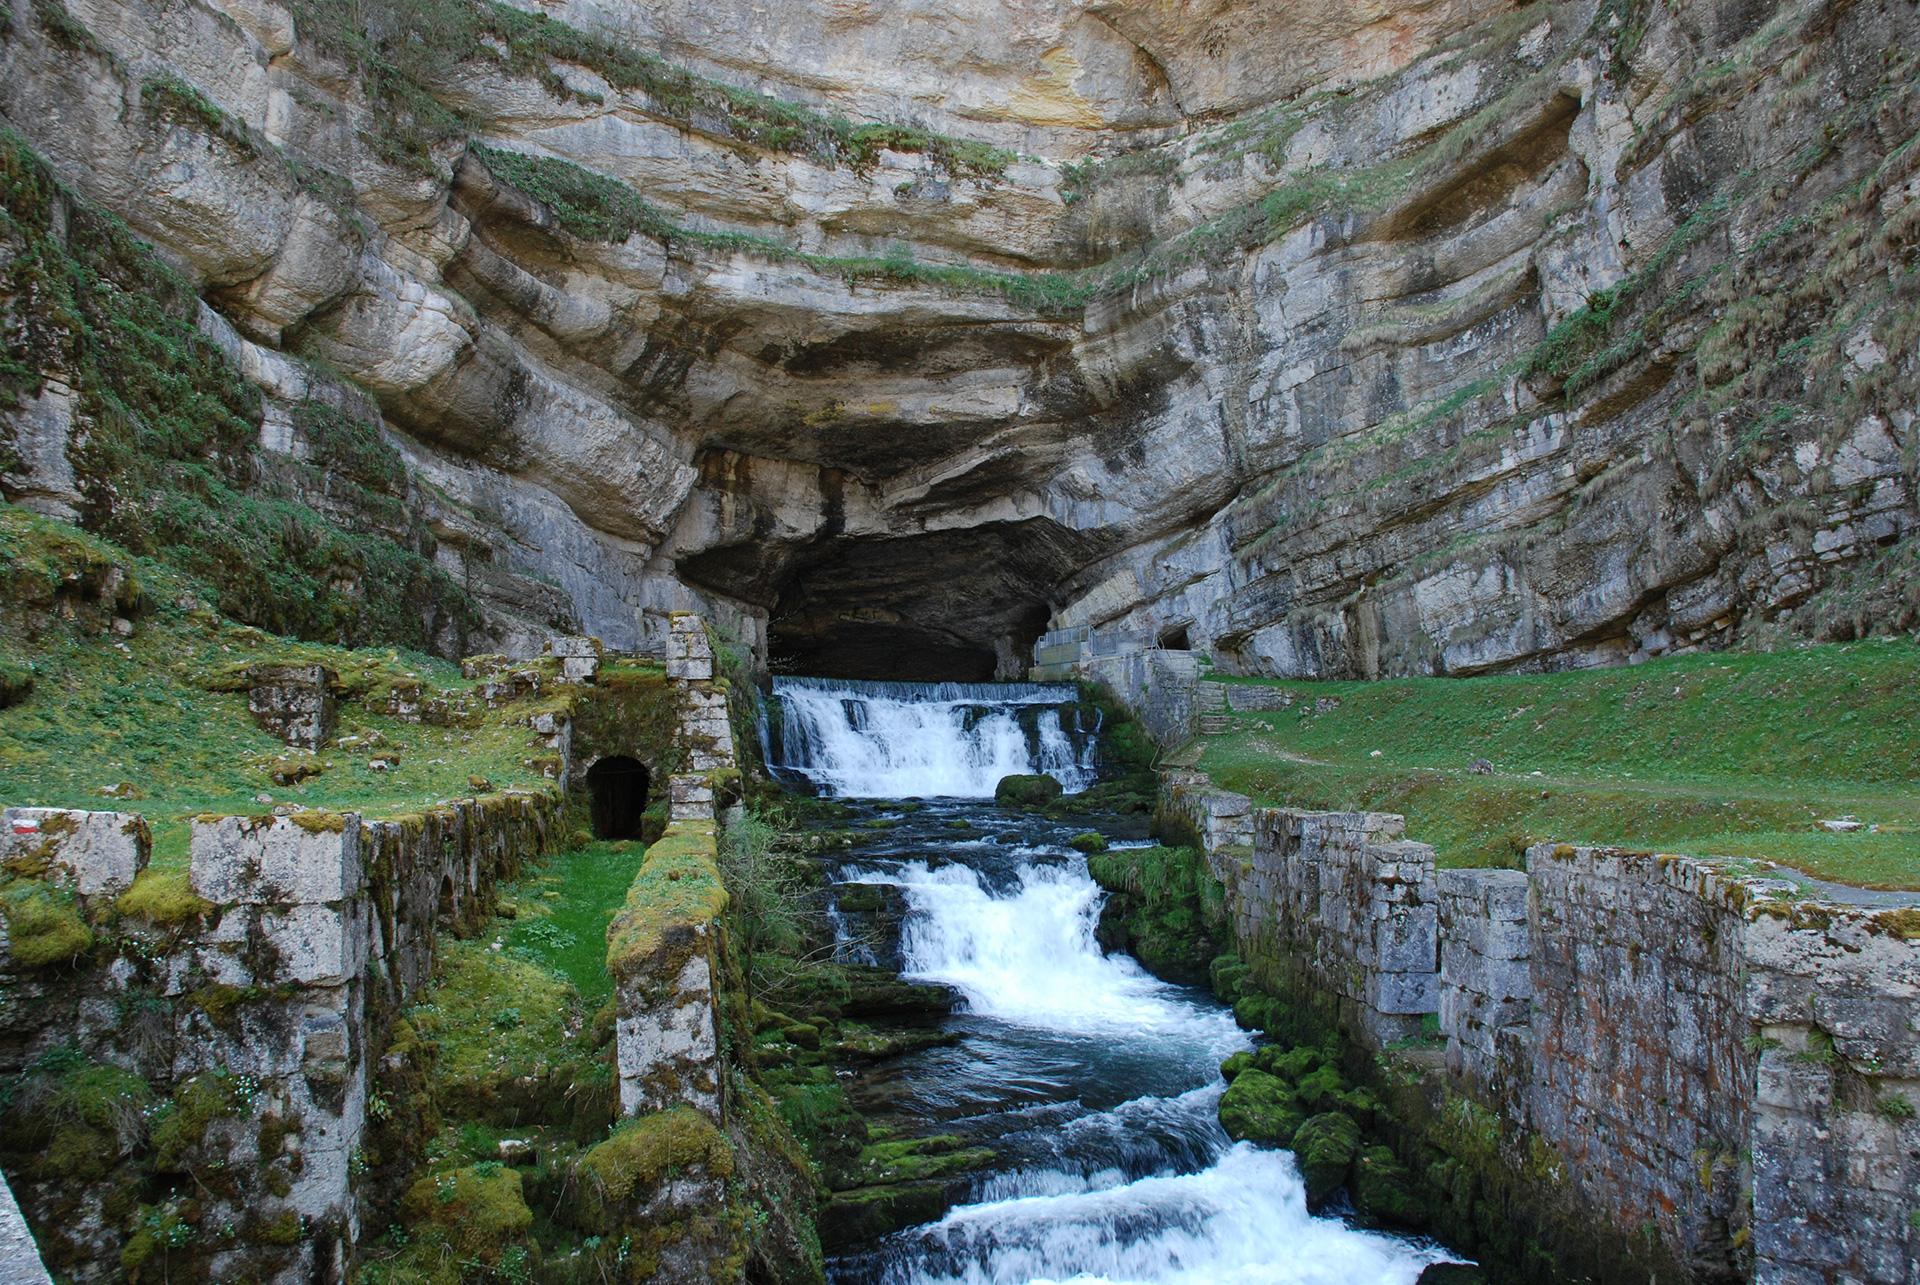 The source of the Loue, a resurgence of the Doubs